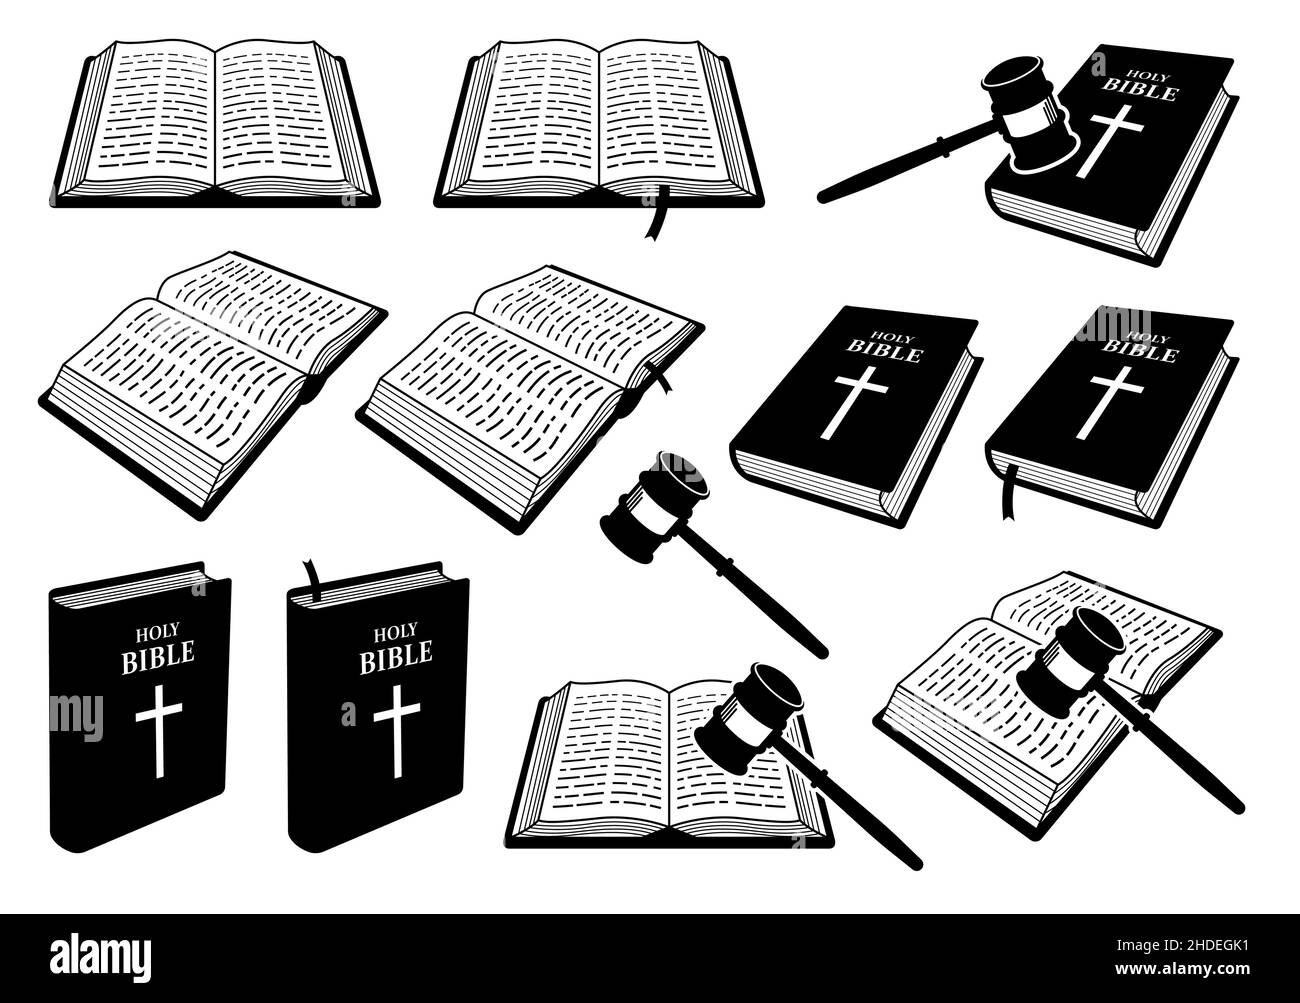 Christian Holy Bible Book of Judgement with judge gavel. Vector illustrations depict a set of Holy Bible books that open, close, showing cover, and wi Stock Vector